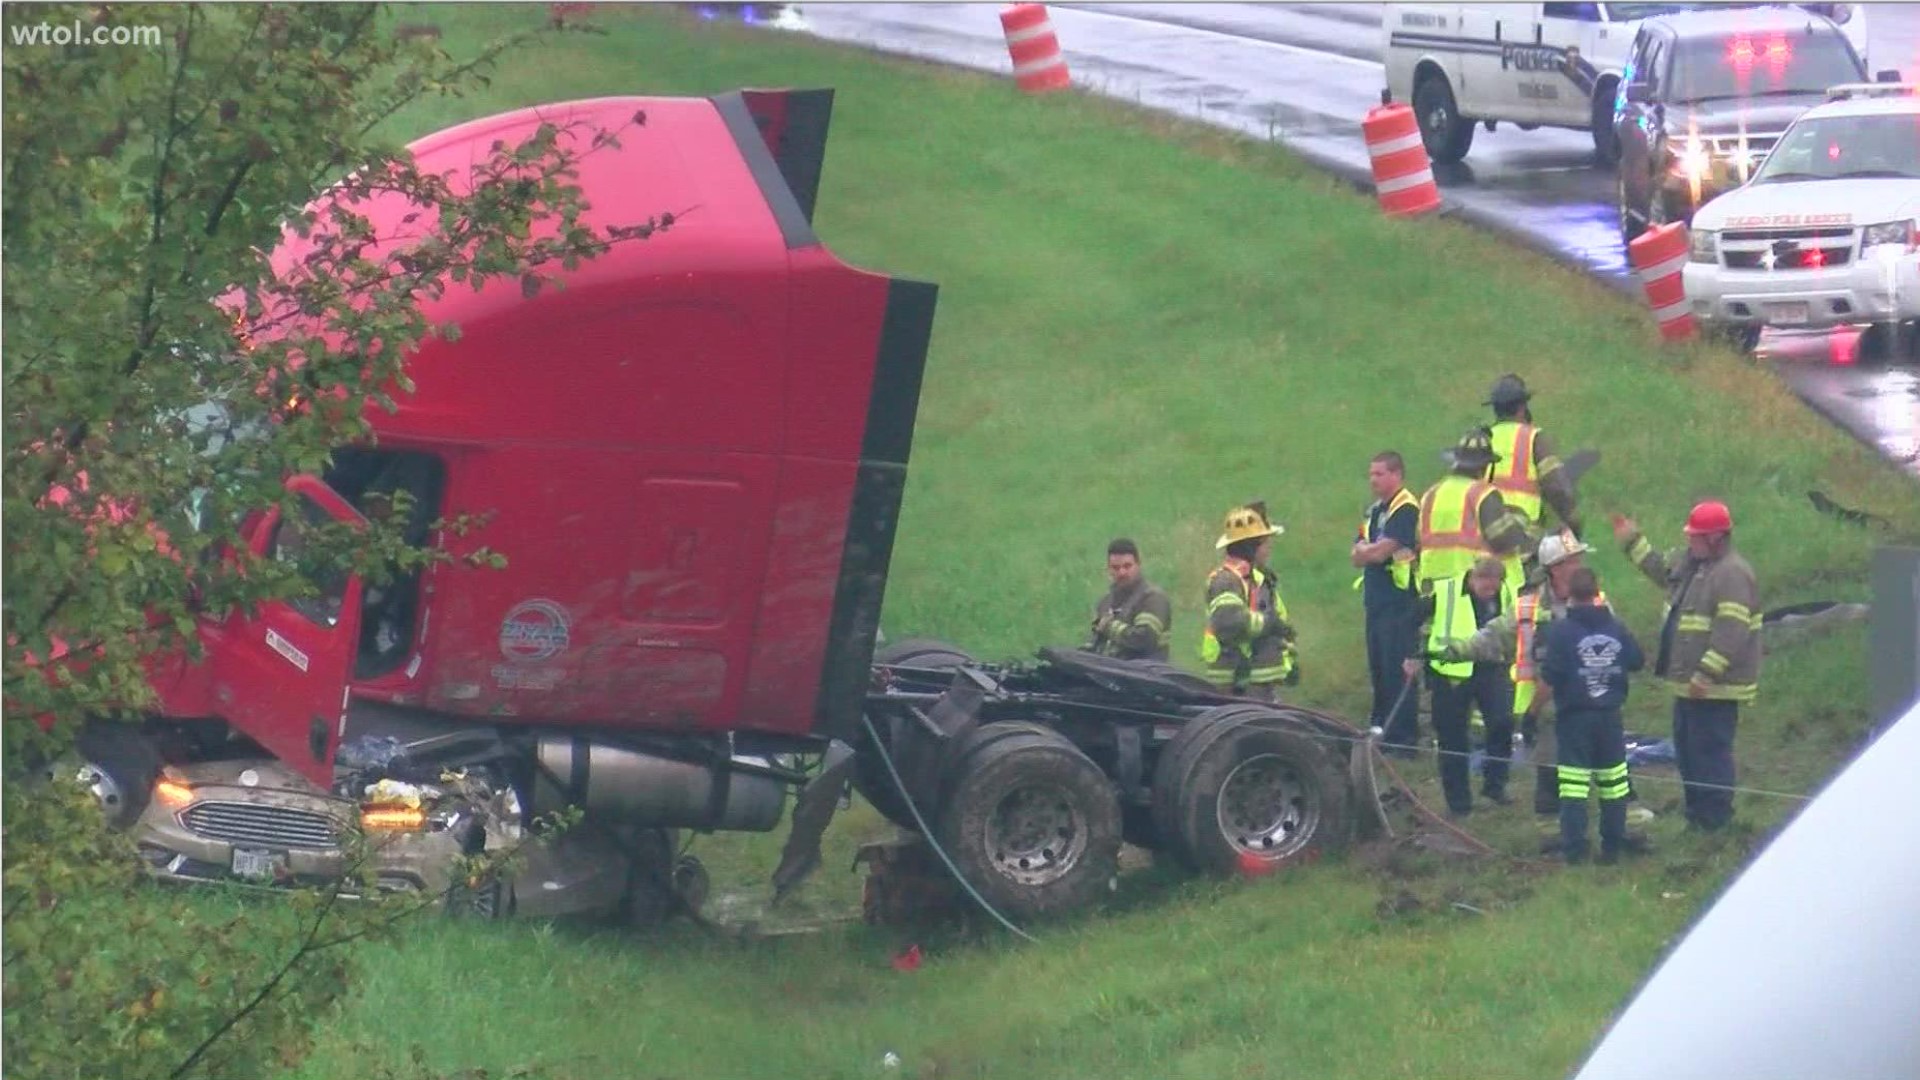 An adult male was extricated from the car. Crews remain on scene at the I-475/I-75 Jeep split working to clear debris.